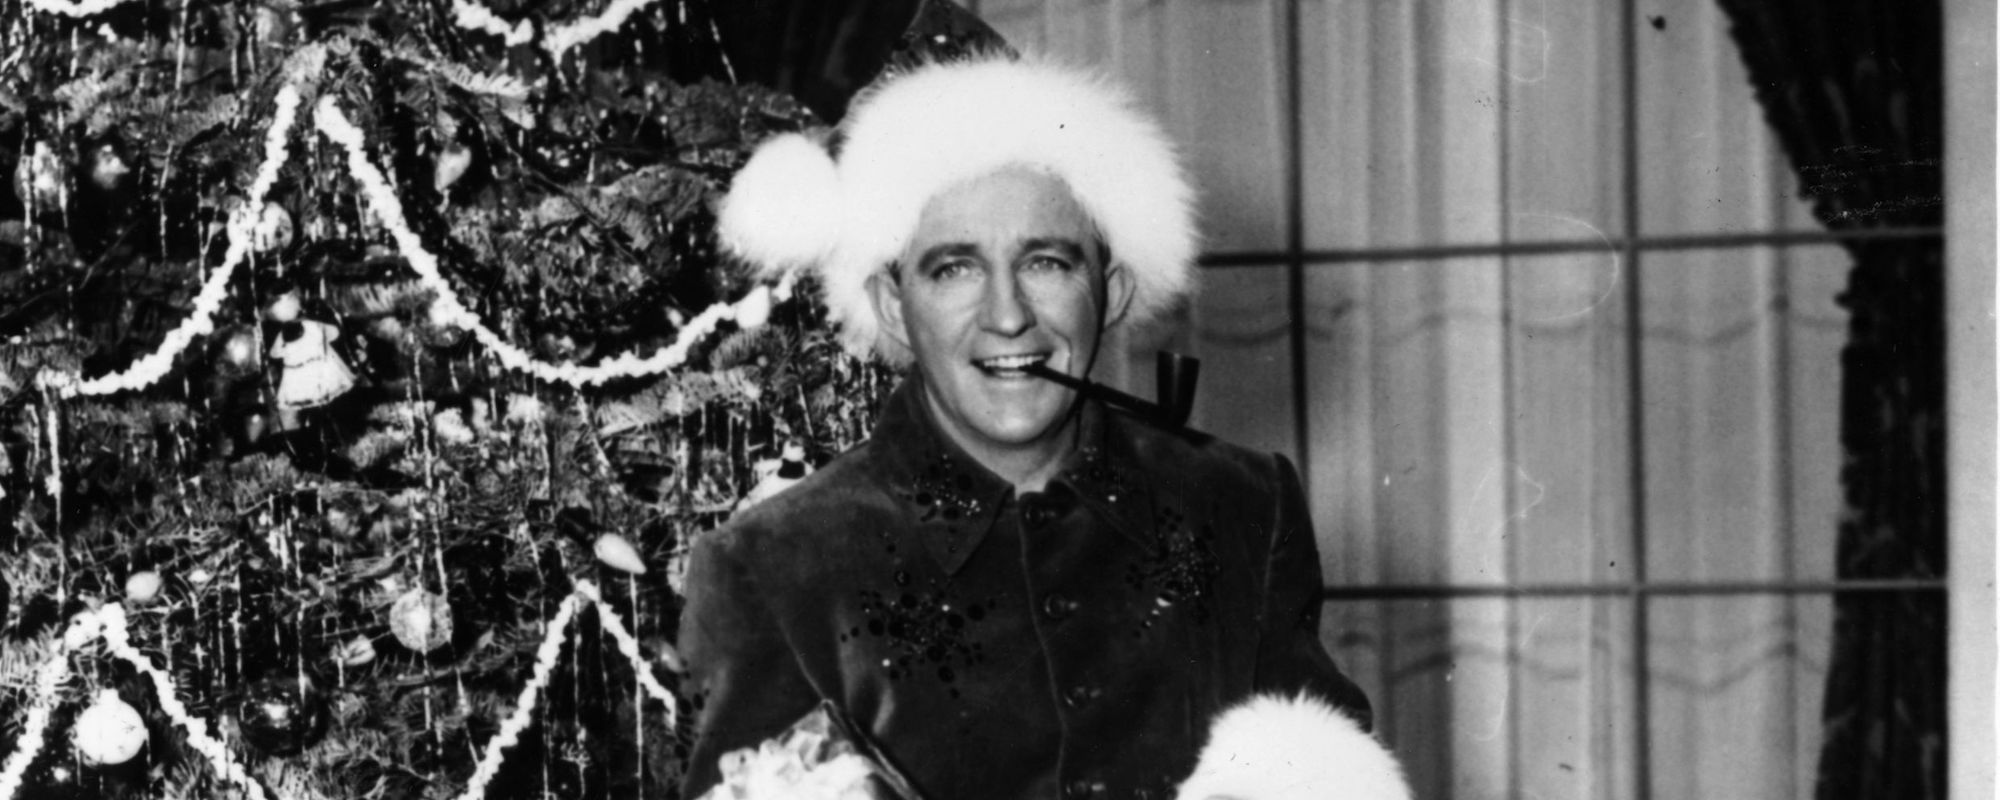 5 Christmas Songs That Were Never Written About Christmas